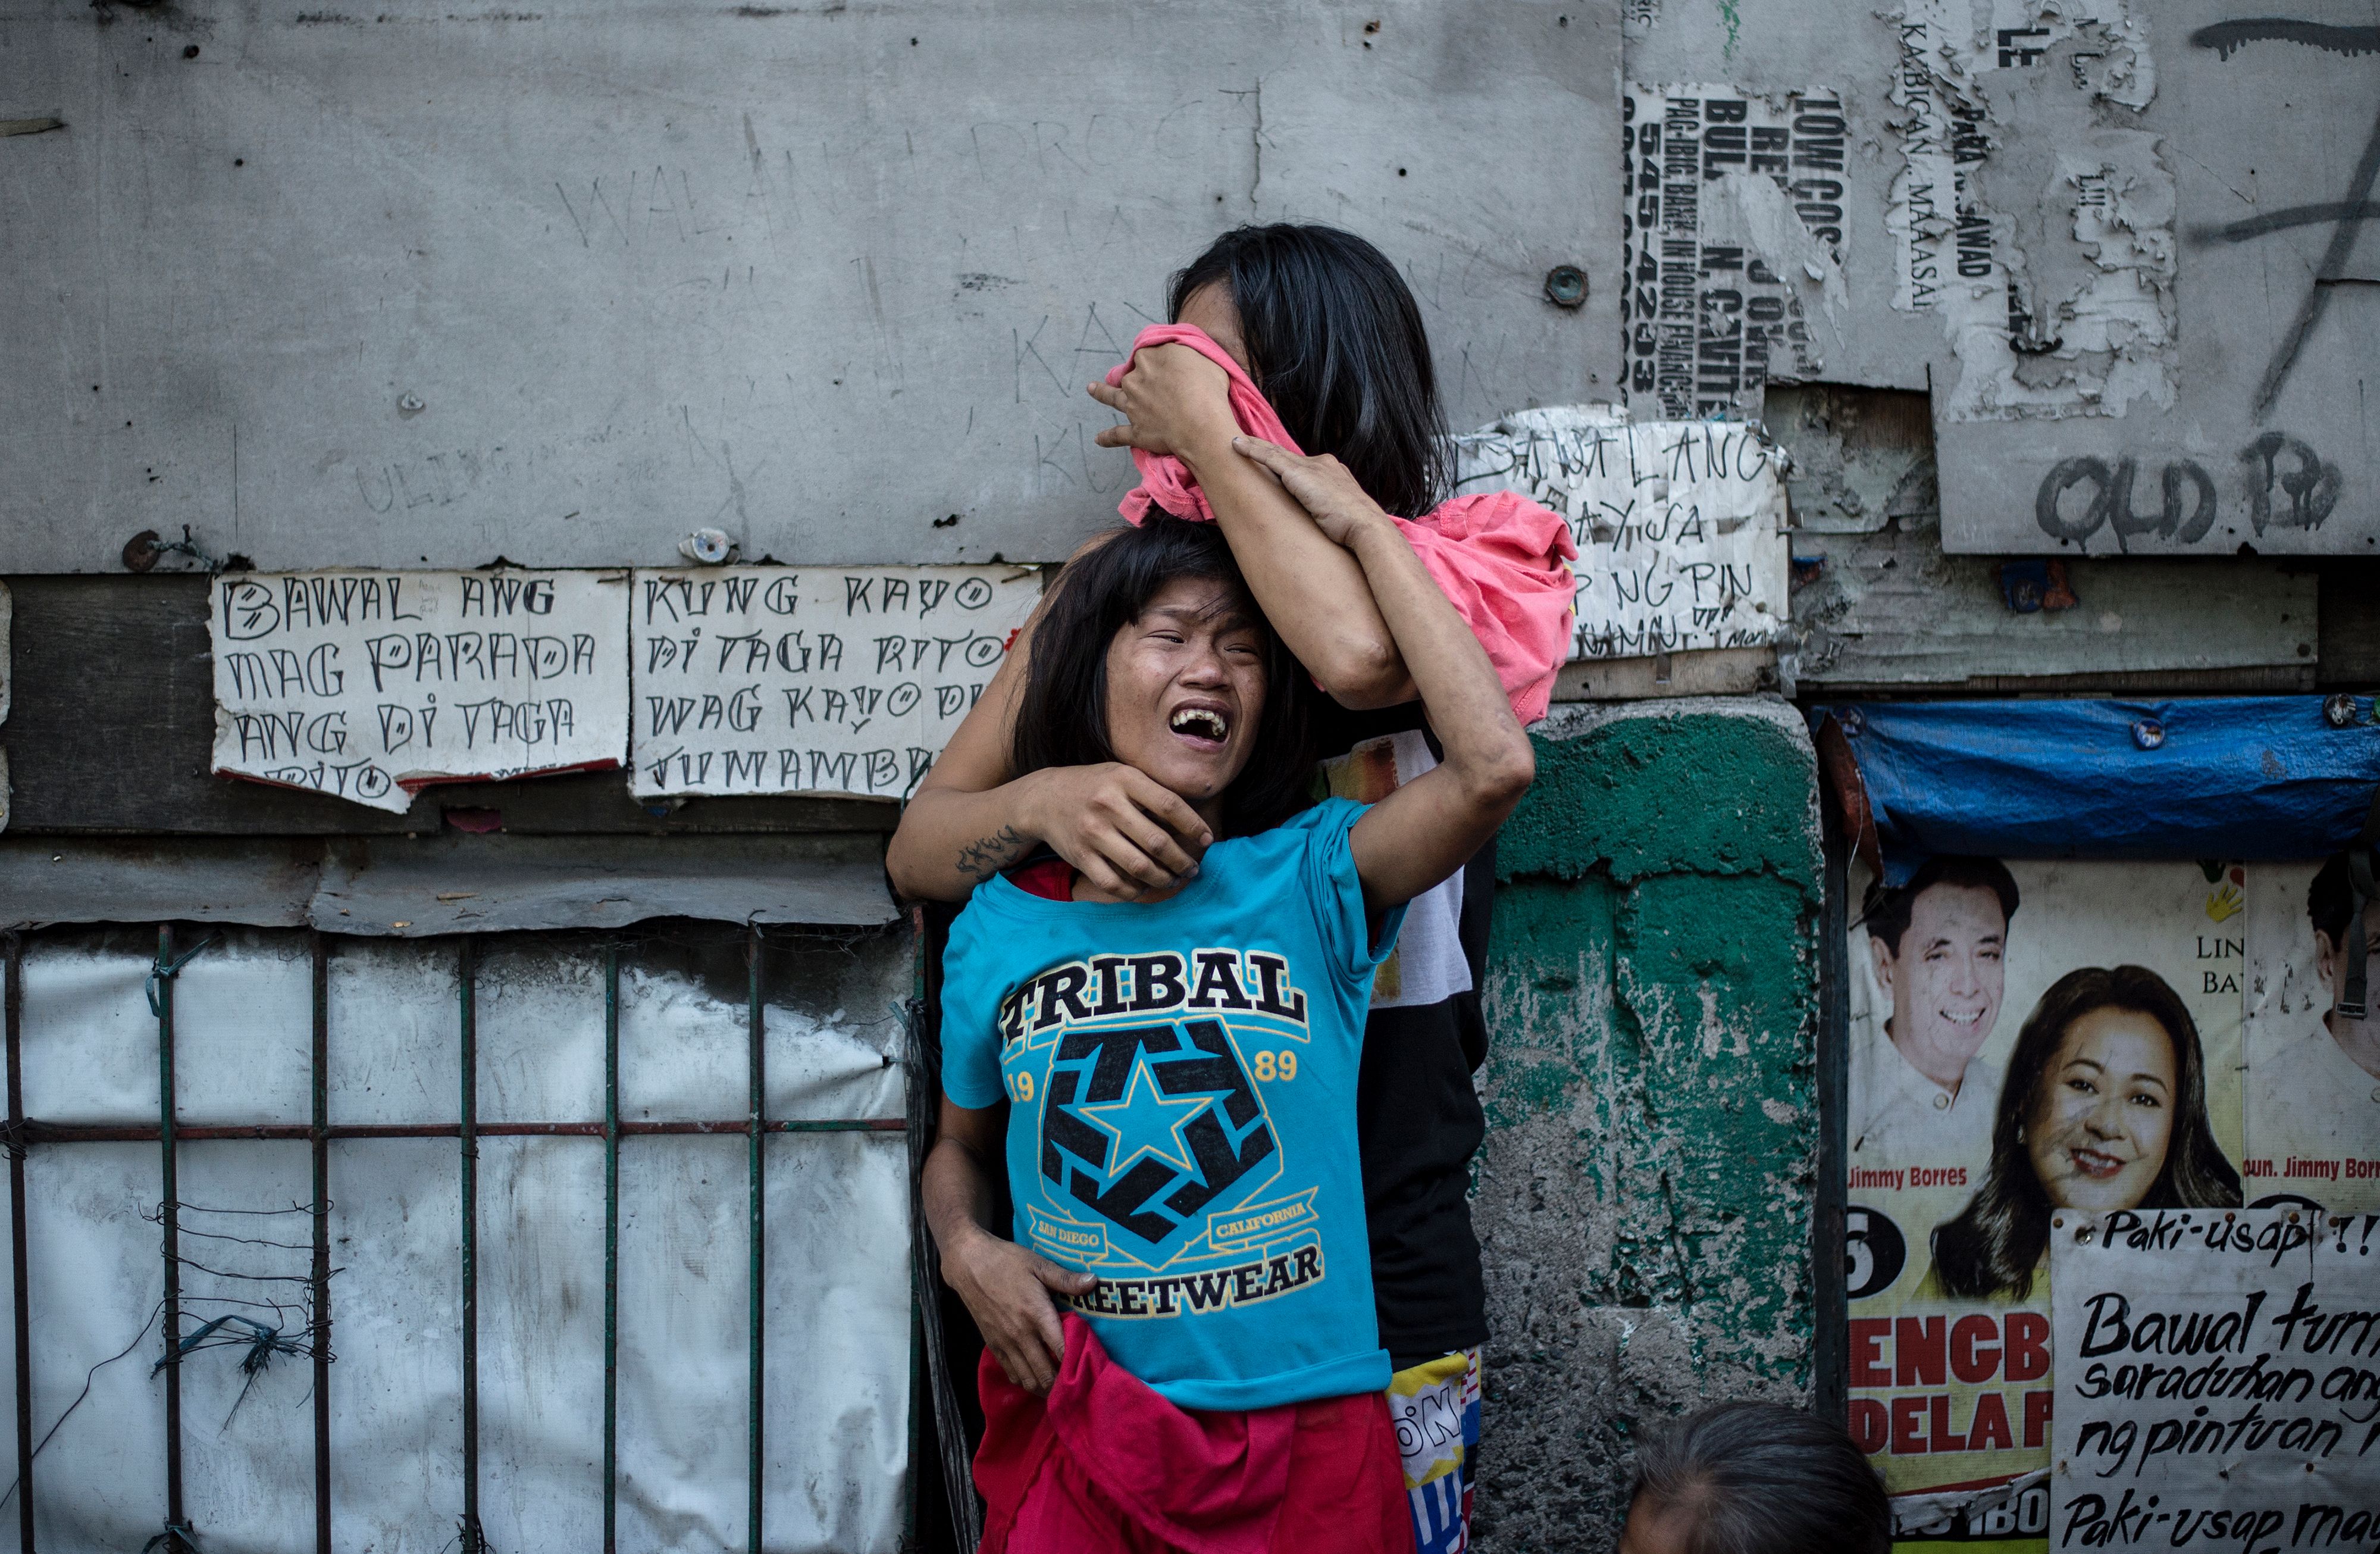 Analyn Roxas, 26, mourns with her sister after her partner, Valien Mendoza, a suspected drug dealer, was gunned down by unidentified assailants in Manila, March 7, 2017. (Noel Celis—AFP/Getty Images)